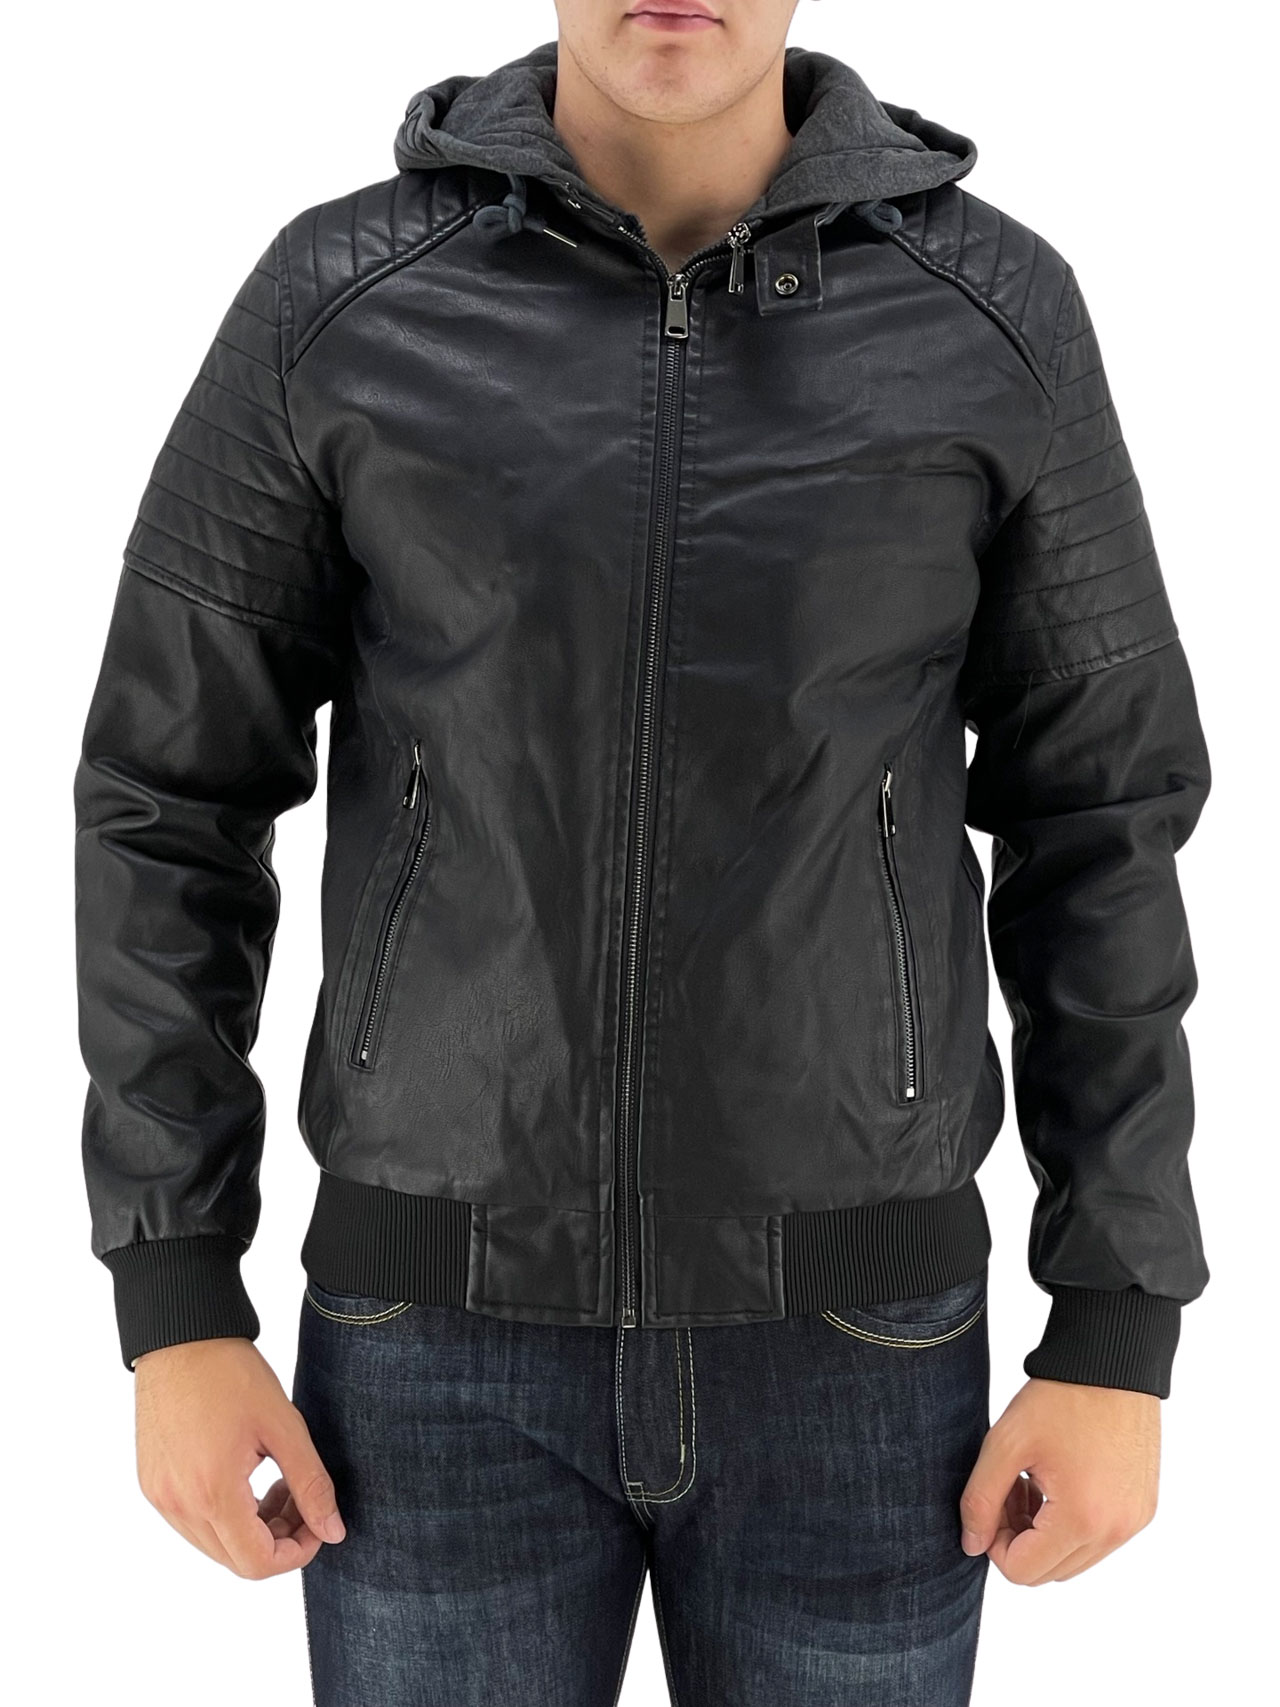 Leatherette jacket with detachable hood code YHMW031